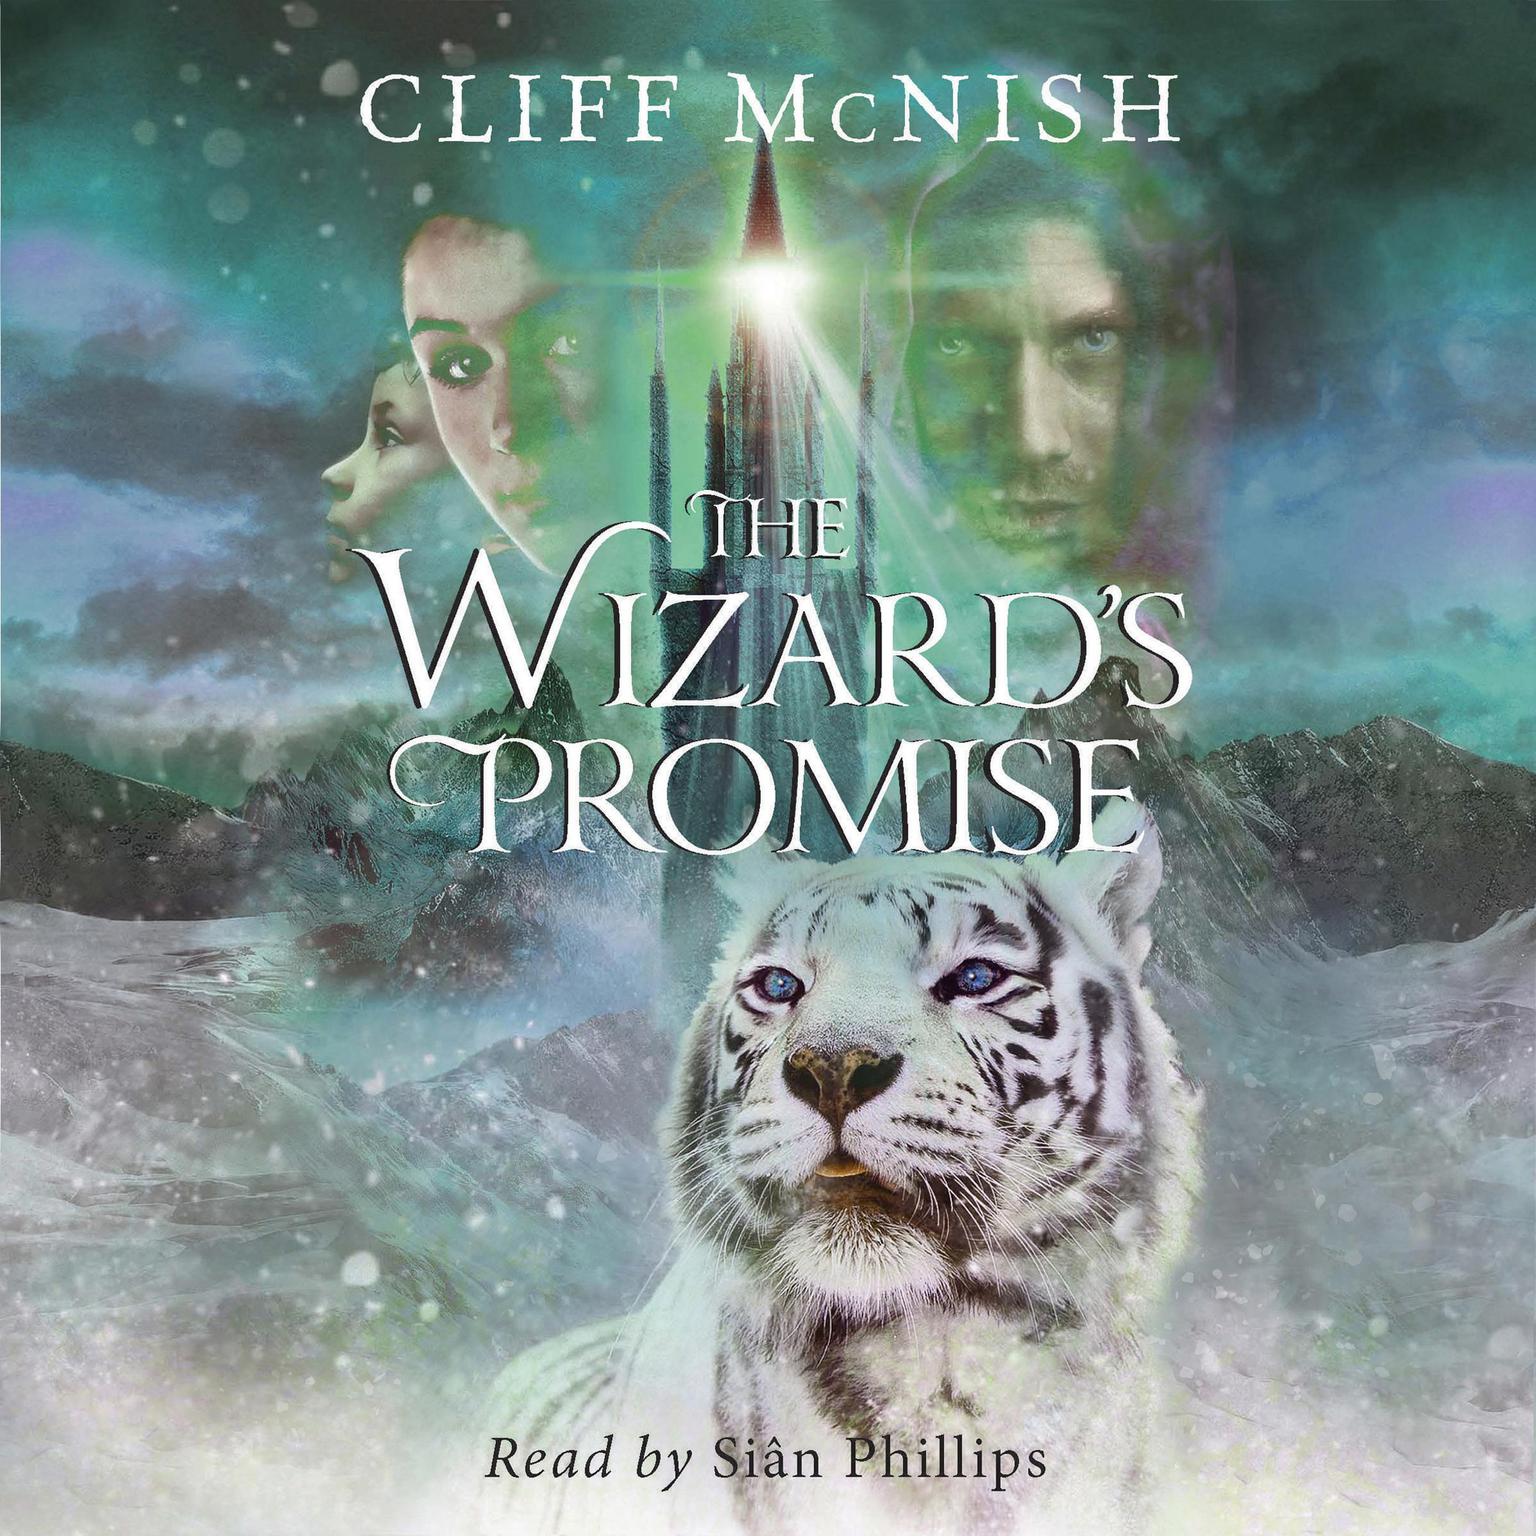 The Wizard’s Promise (Abridged) Audiobook, by Cliff McNish